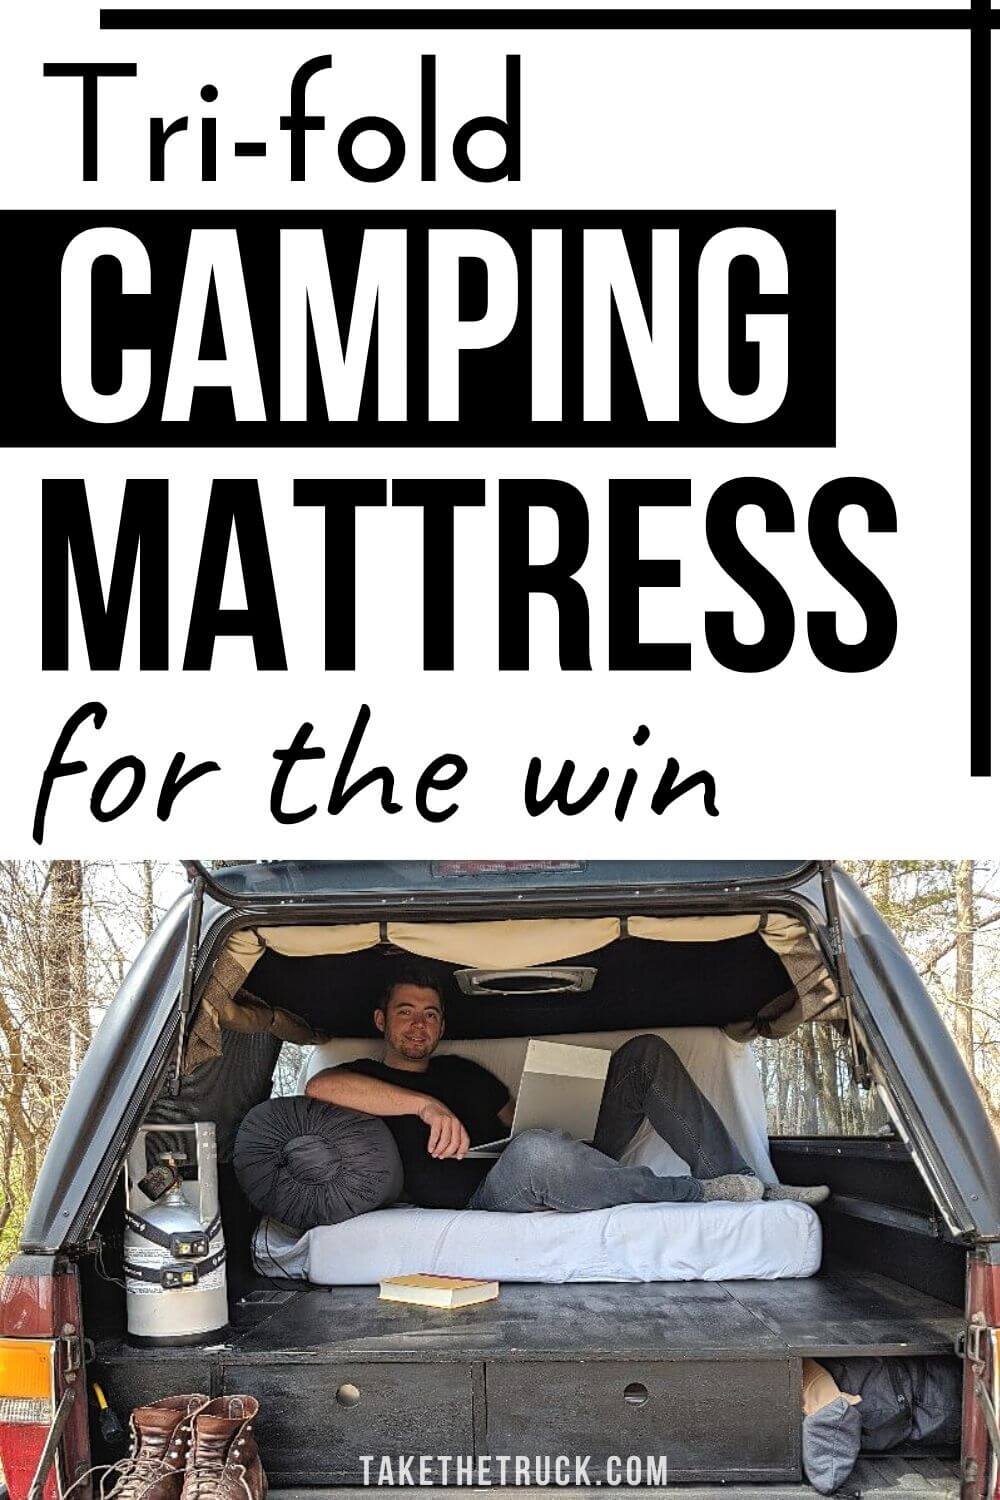 Are you searching for a truck bed mattress for camping? This tri fold camping mattress is the perfect foam or memory foam mattress for your truck bed, SUV, car, campervan, or small camper! 